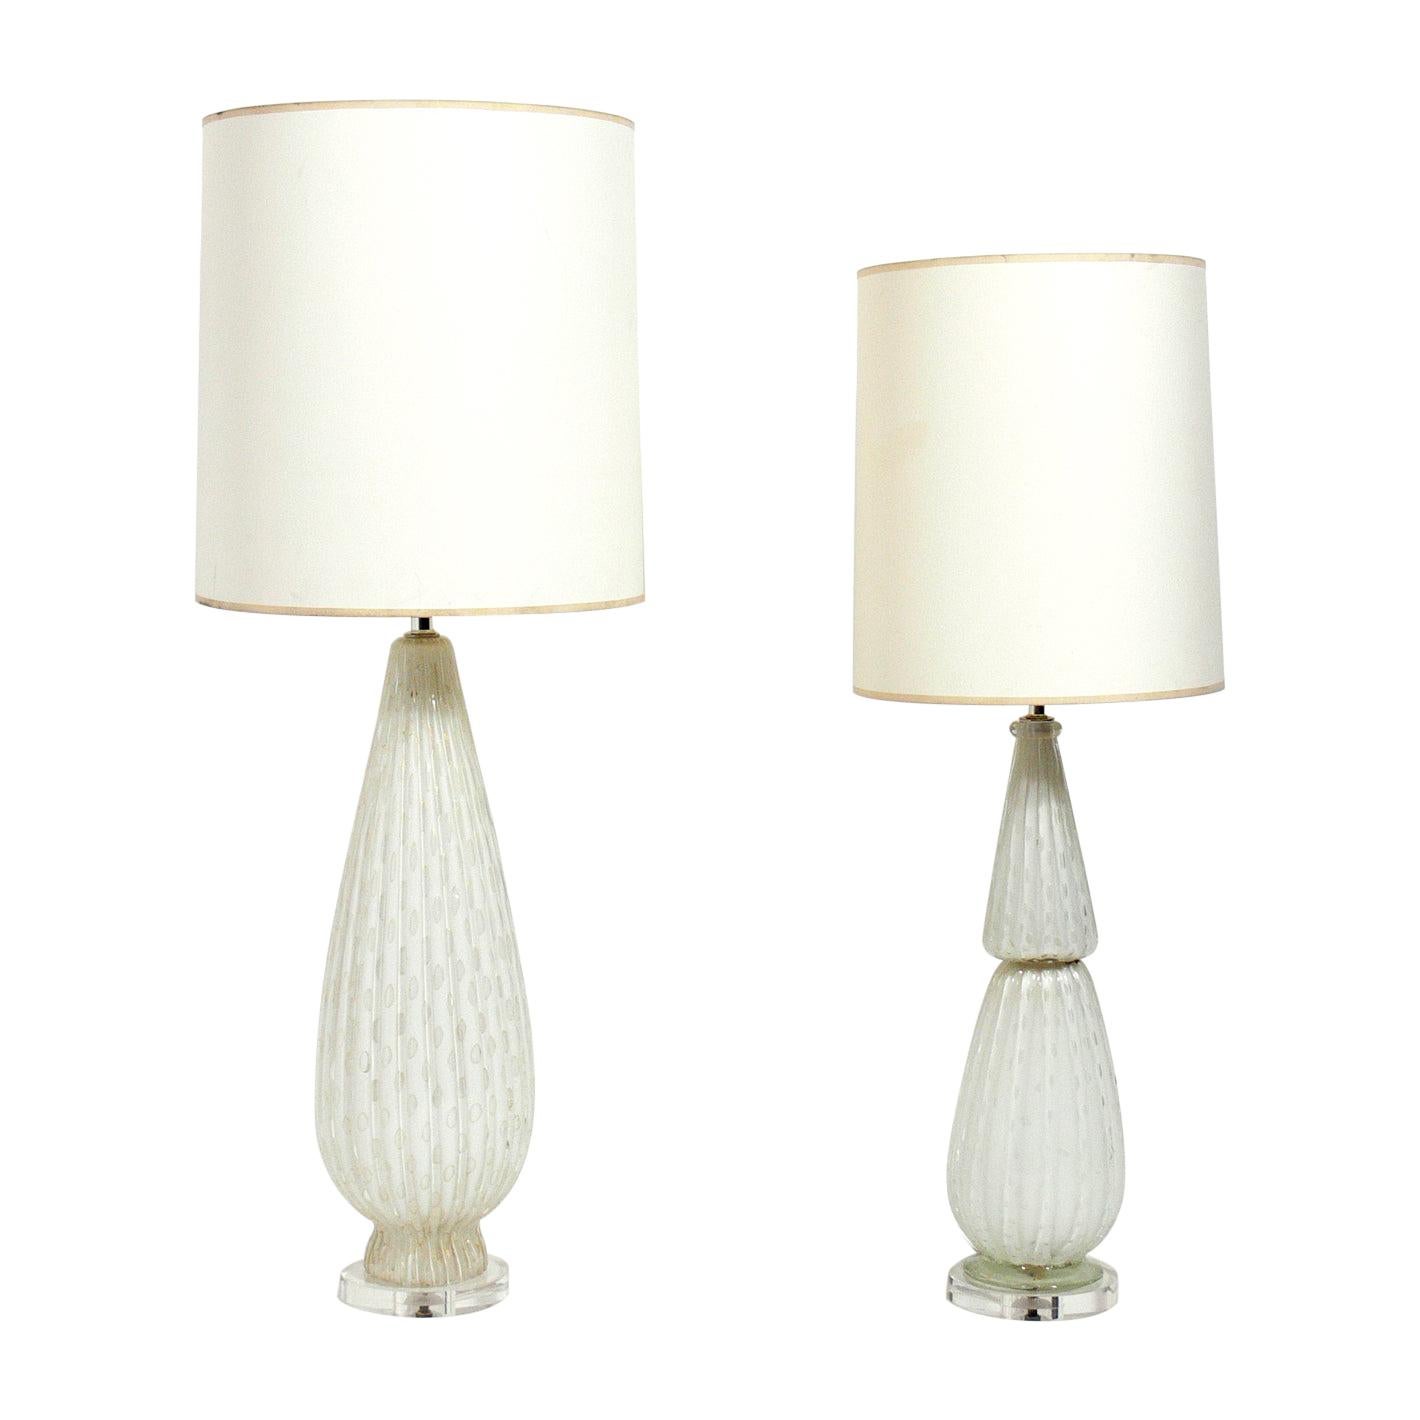 Vintage Murano Glass Lamps Spain, SAVE 43% - lutheranems.com